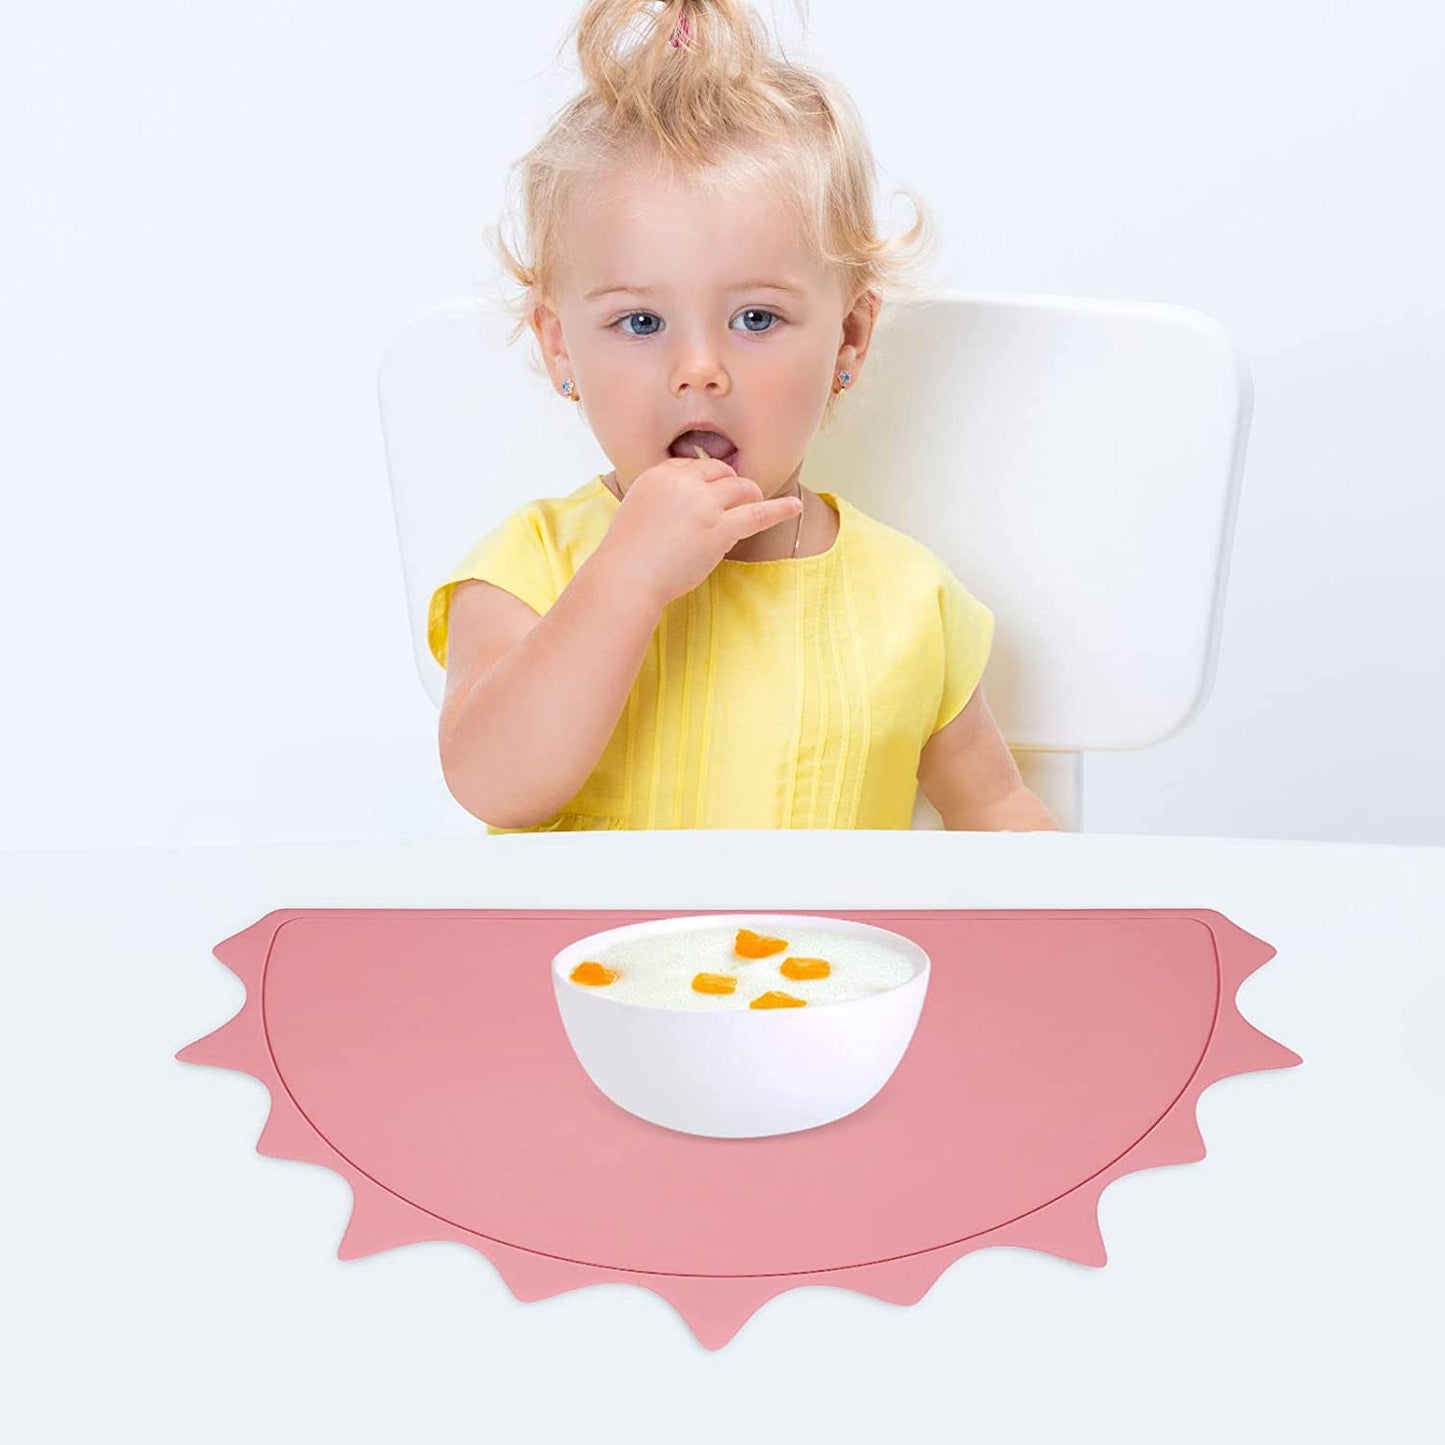 Table Mats Silicone Kids Placemats Toddler For Dining Non Slip Meal Time  Babies Toddlers From Hualiigg, $11.11